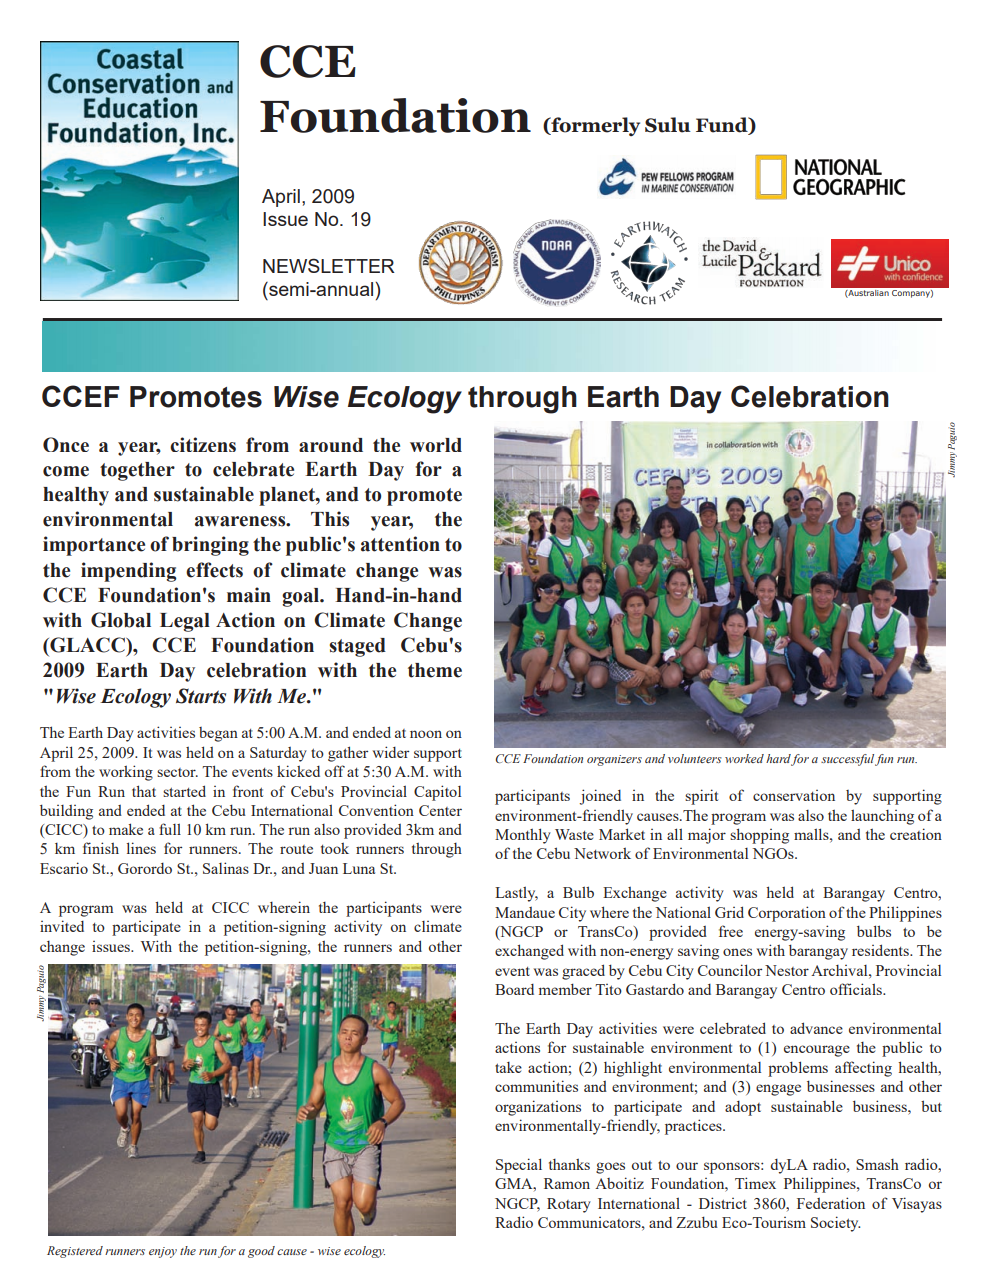 CCEF PROMOTES WISE ECOLOGY THROUGH EARTH DAY CELEBRATION